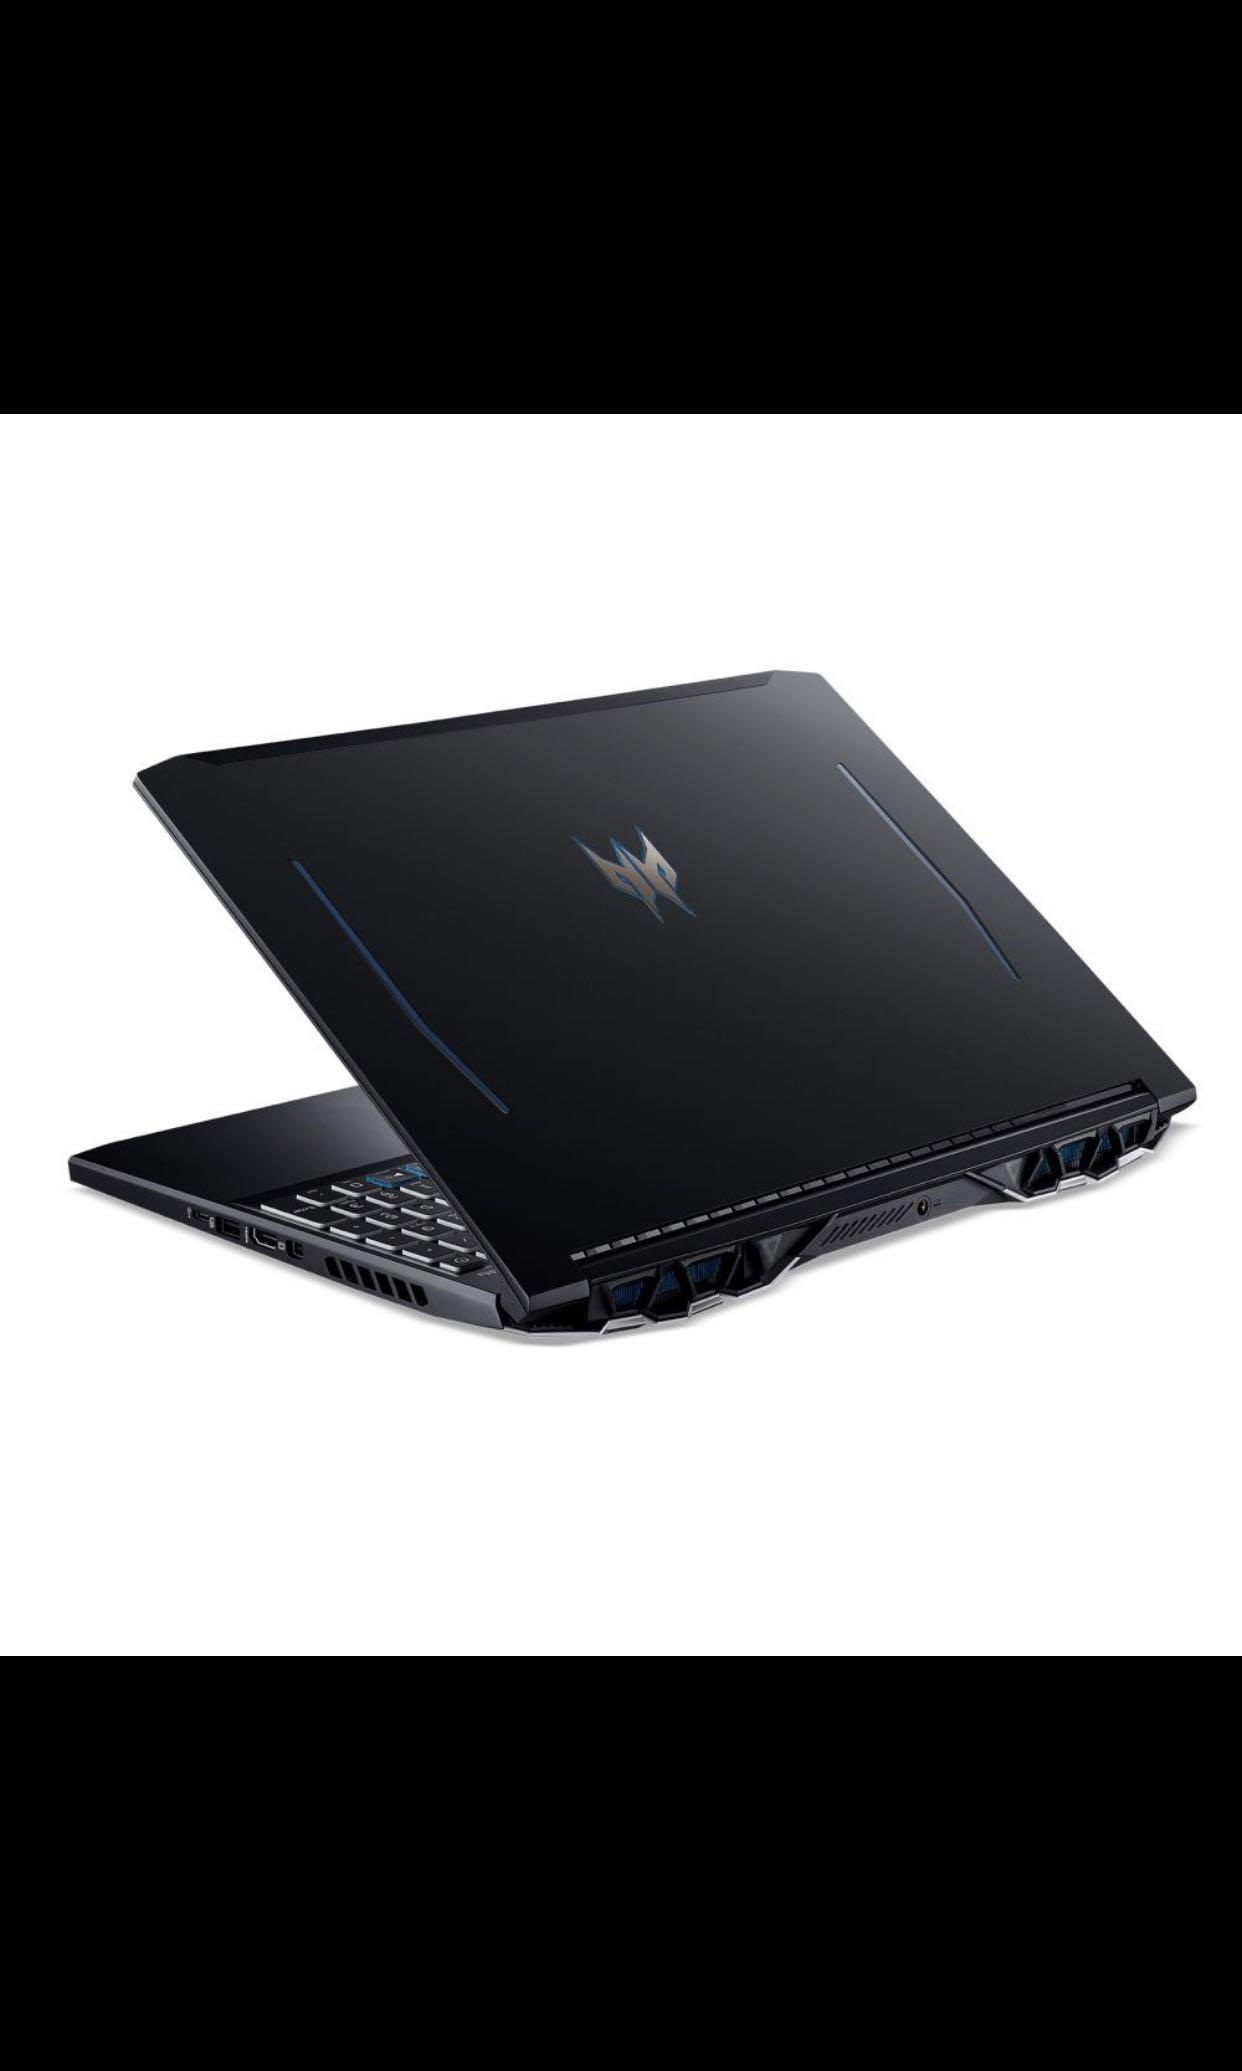 Acer Predator Helios 300 PH317-54 17.3 inch Laptop, Computers  Tech,  Laptops  Notebooks on Carousell